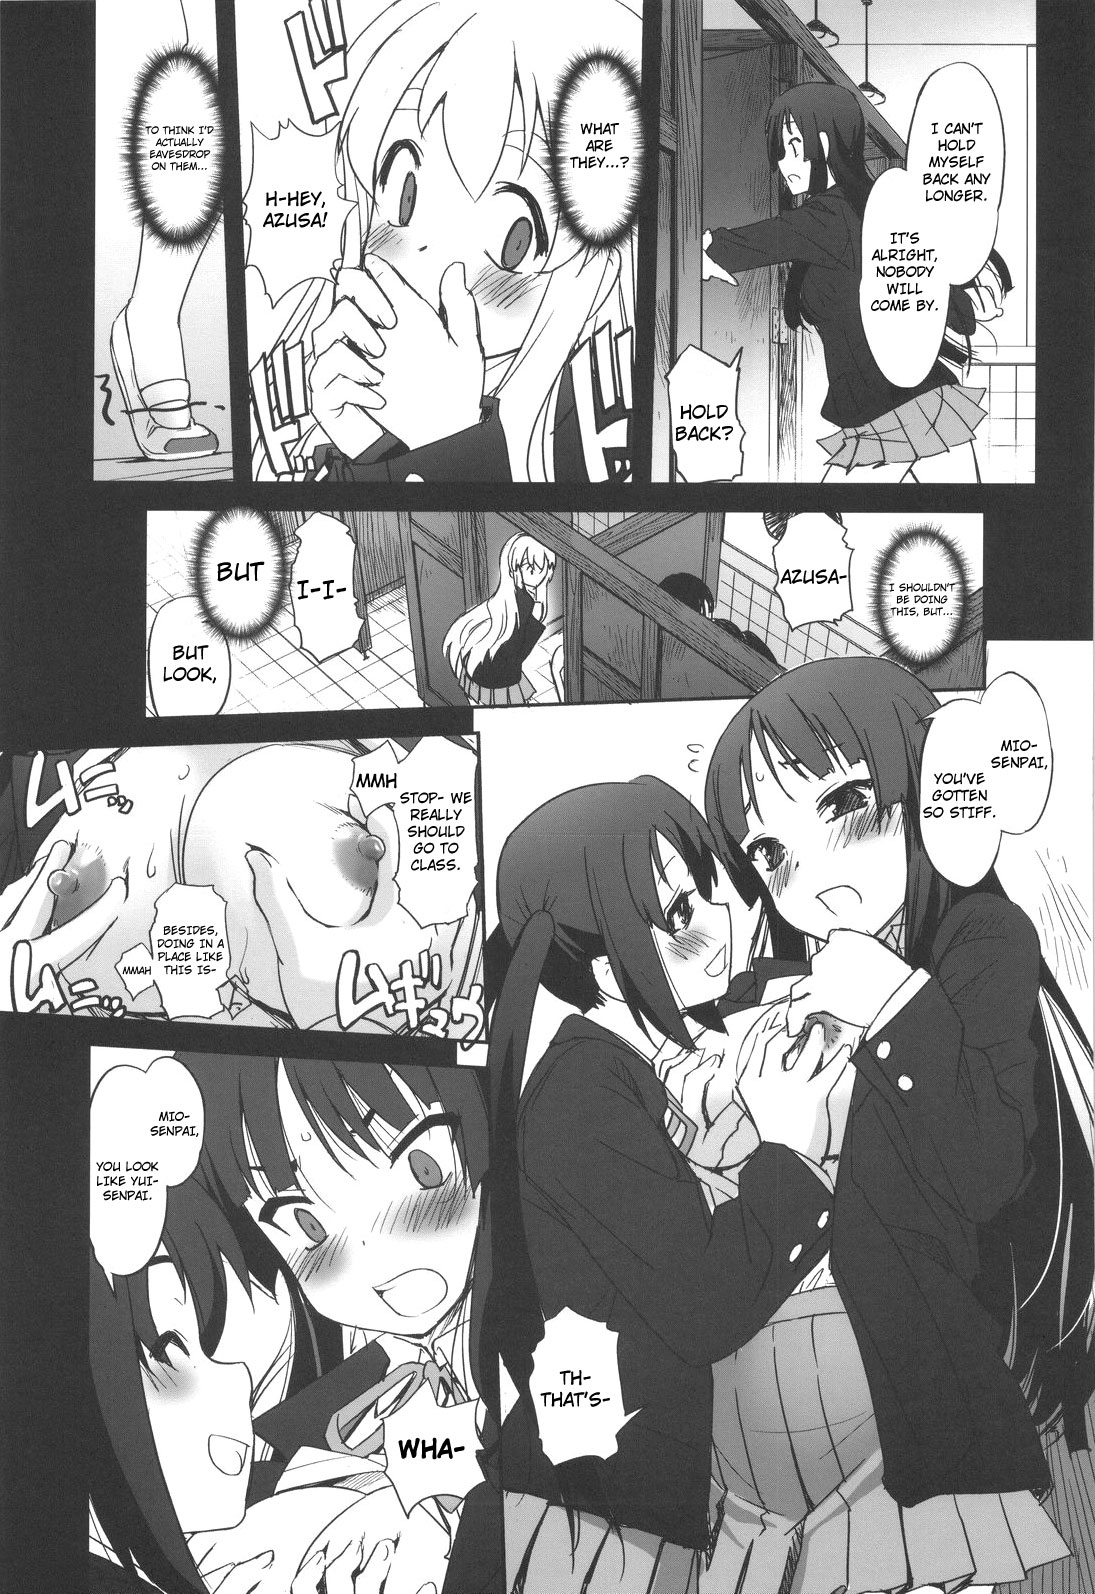 (C76) [G-Power! (Sasayuki)] Nekomimi to Toilet to Houkago no Bushitsu | Cat Ears And A Restroom And The Club Room After School (K-ON) [English] [Nicchiscans-4Dawgz] 10